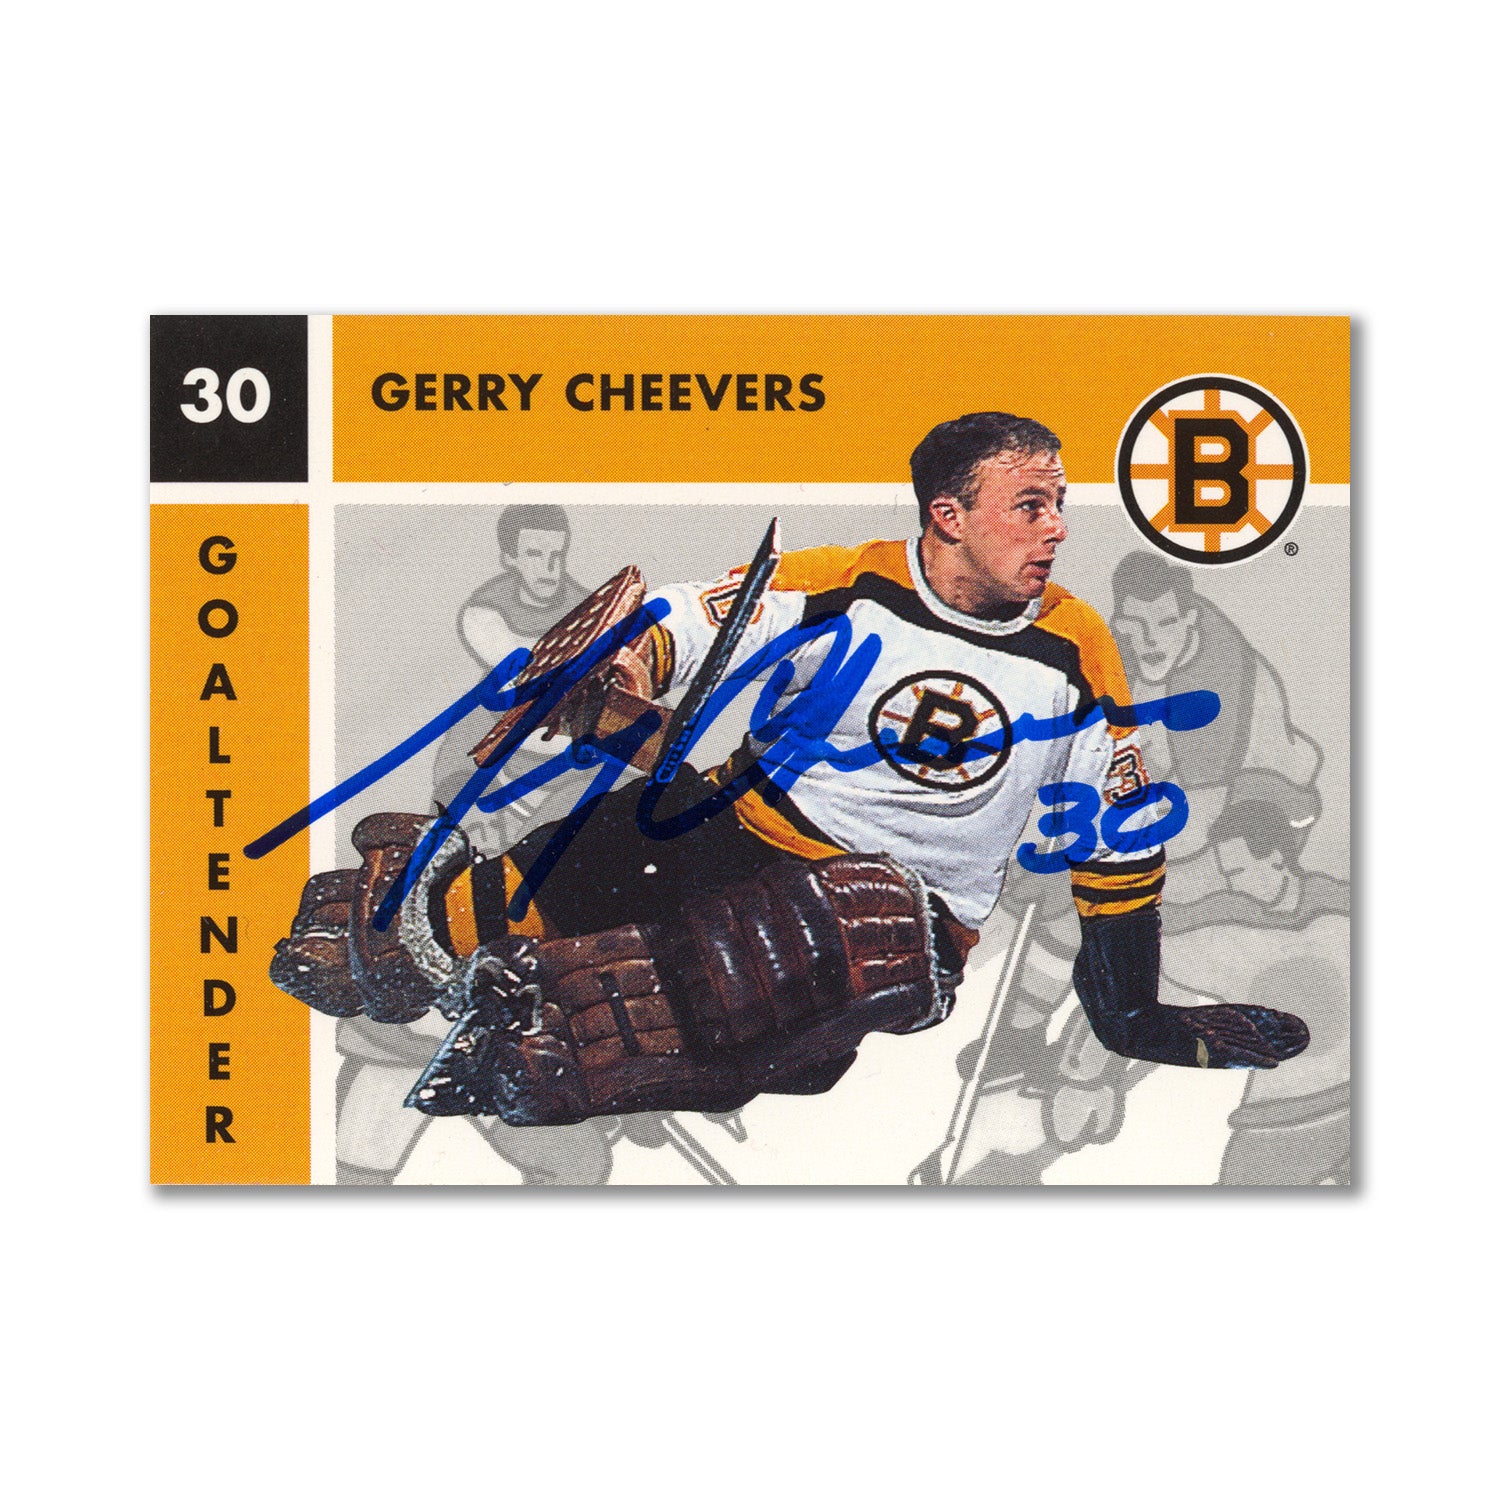 Autographed 1995 Parkhurst Missing Link #16 Gerry Cheevers Hockey Card